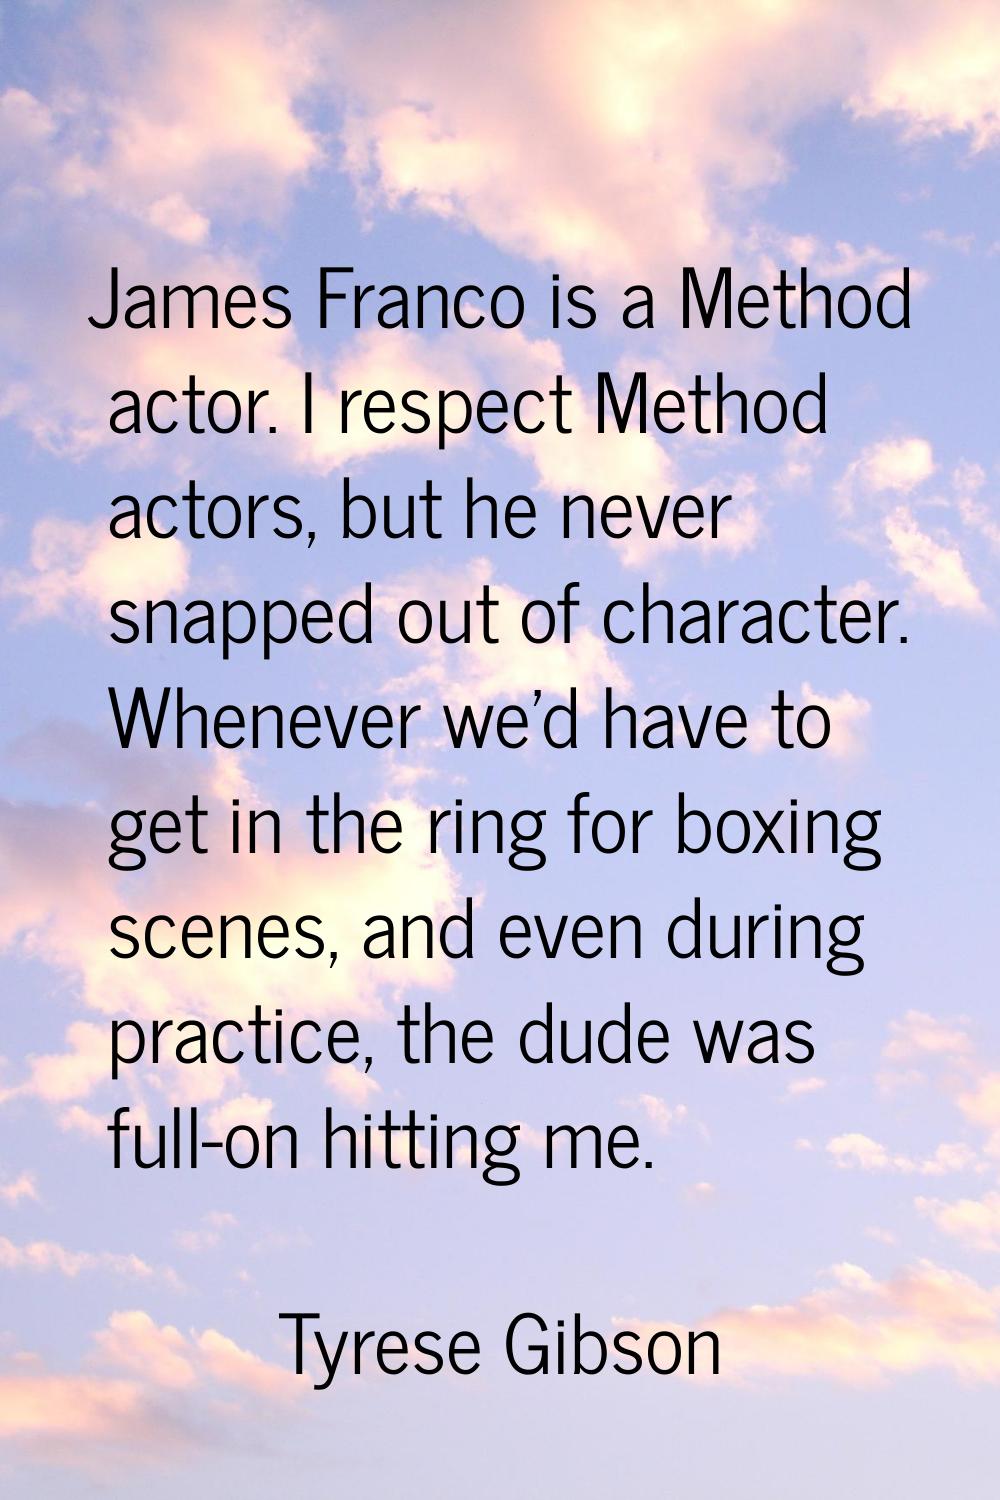 James Franco is a Method actor. I respect Method actors, but he never snapped out of character. Whe